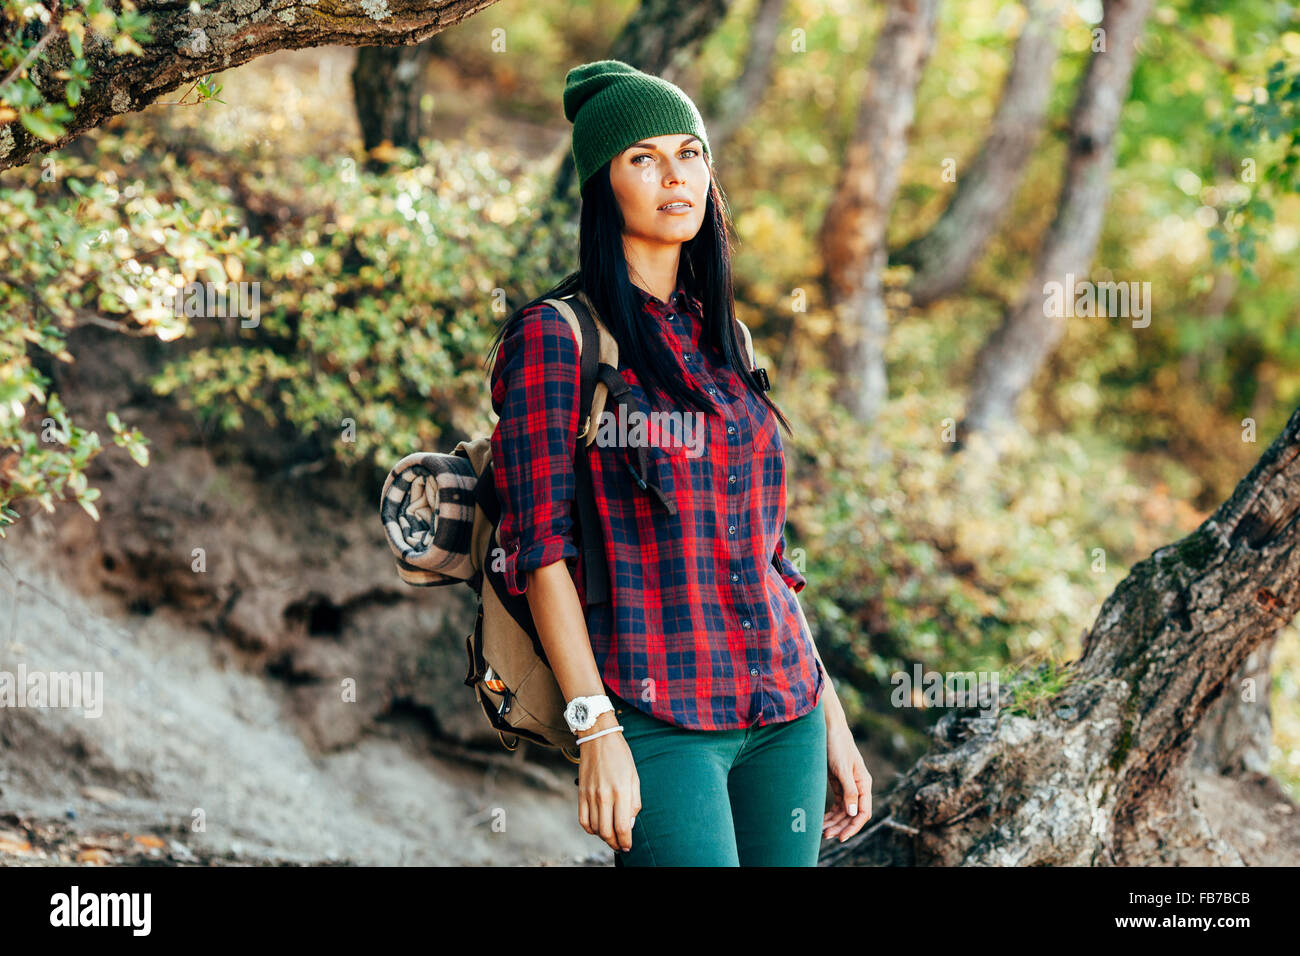 Portrait of woman hiking in forest Banque D'Images